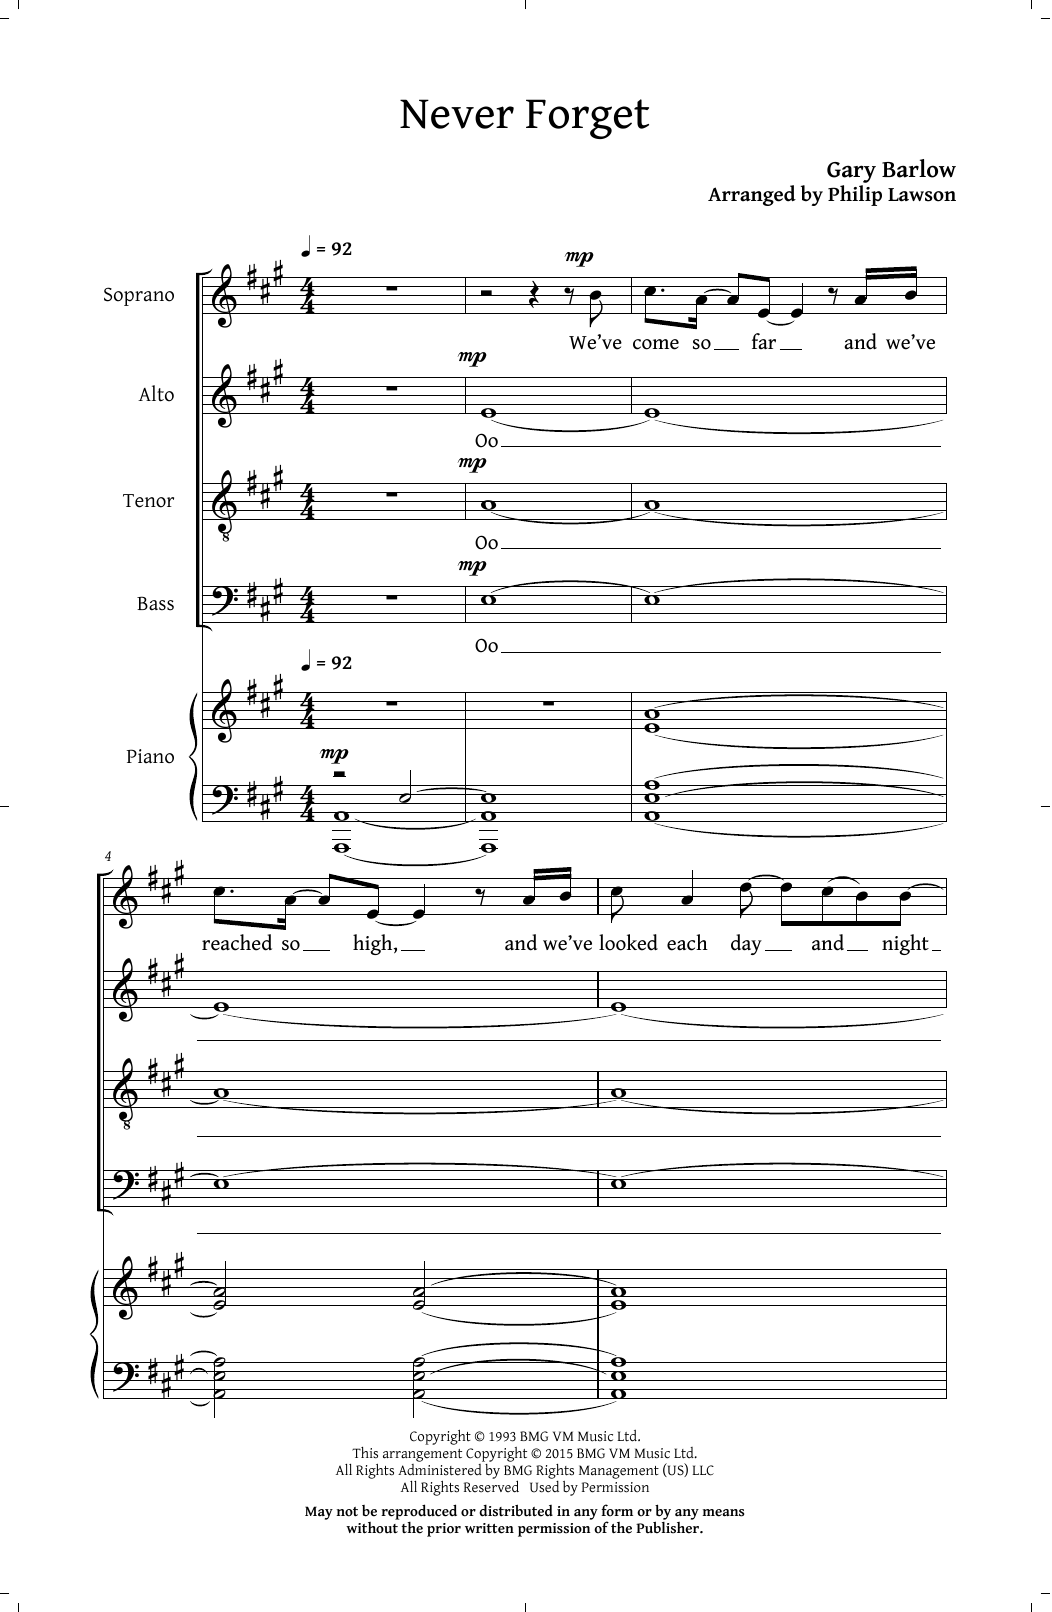 Download Take That Never Forget (arr. Philip Lawson) Sheet Music